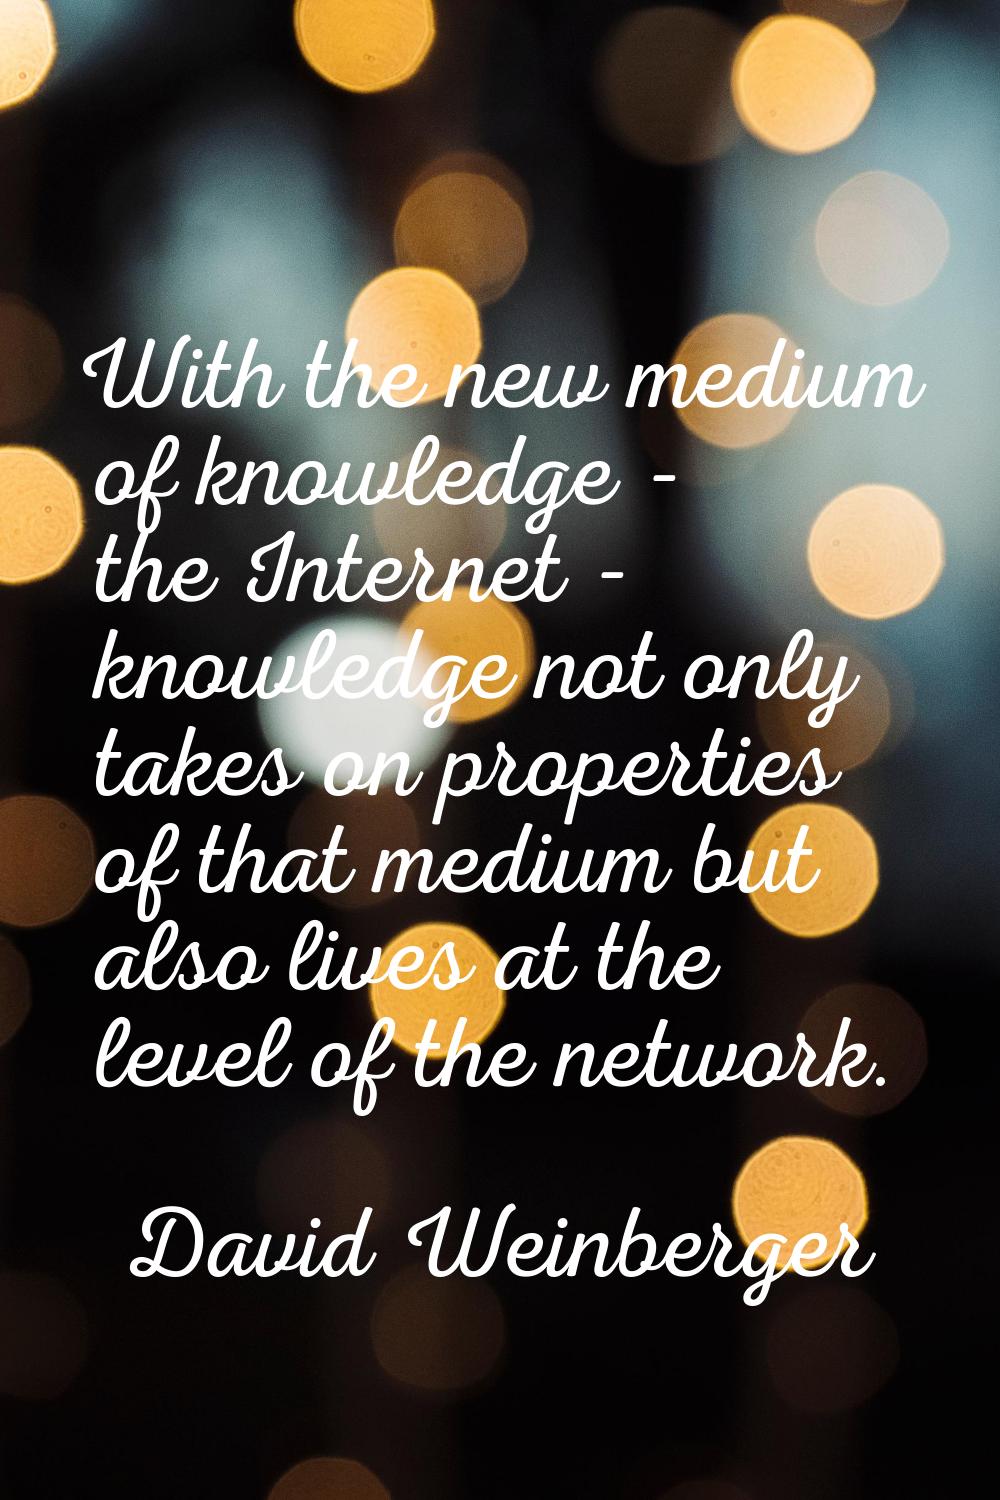 With the new medium of knowledge - the Internet - knowledge not only takes on properties of that me